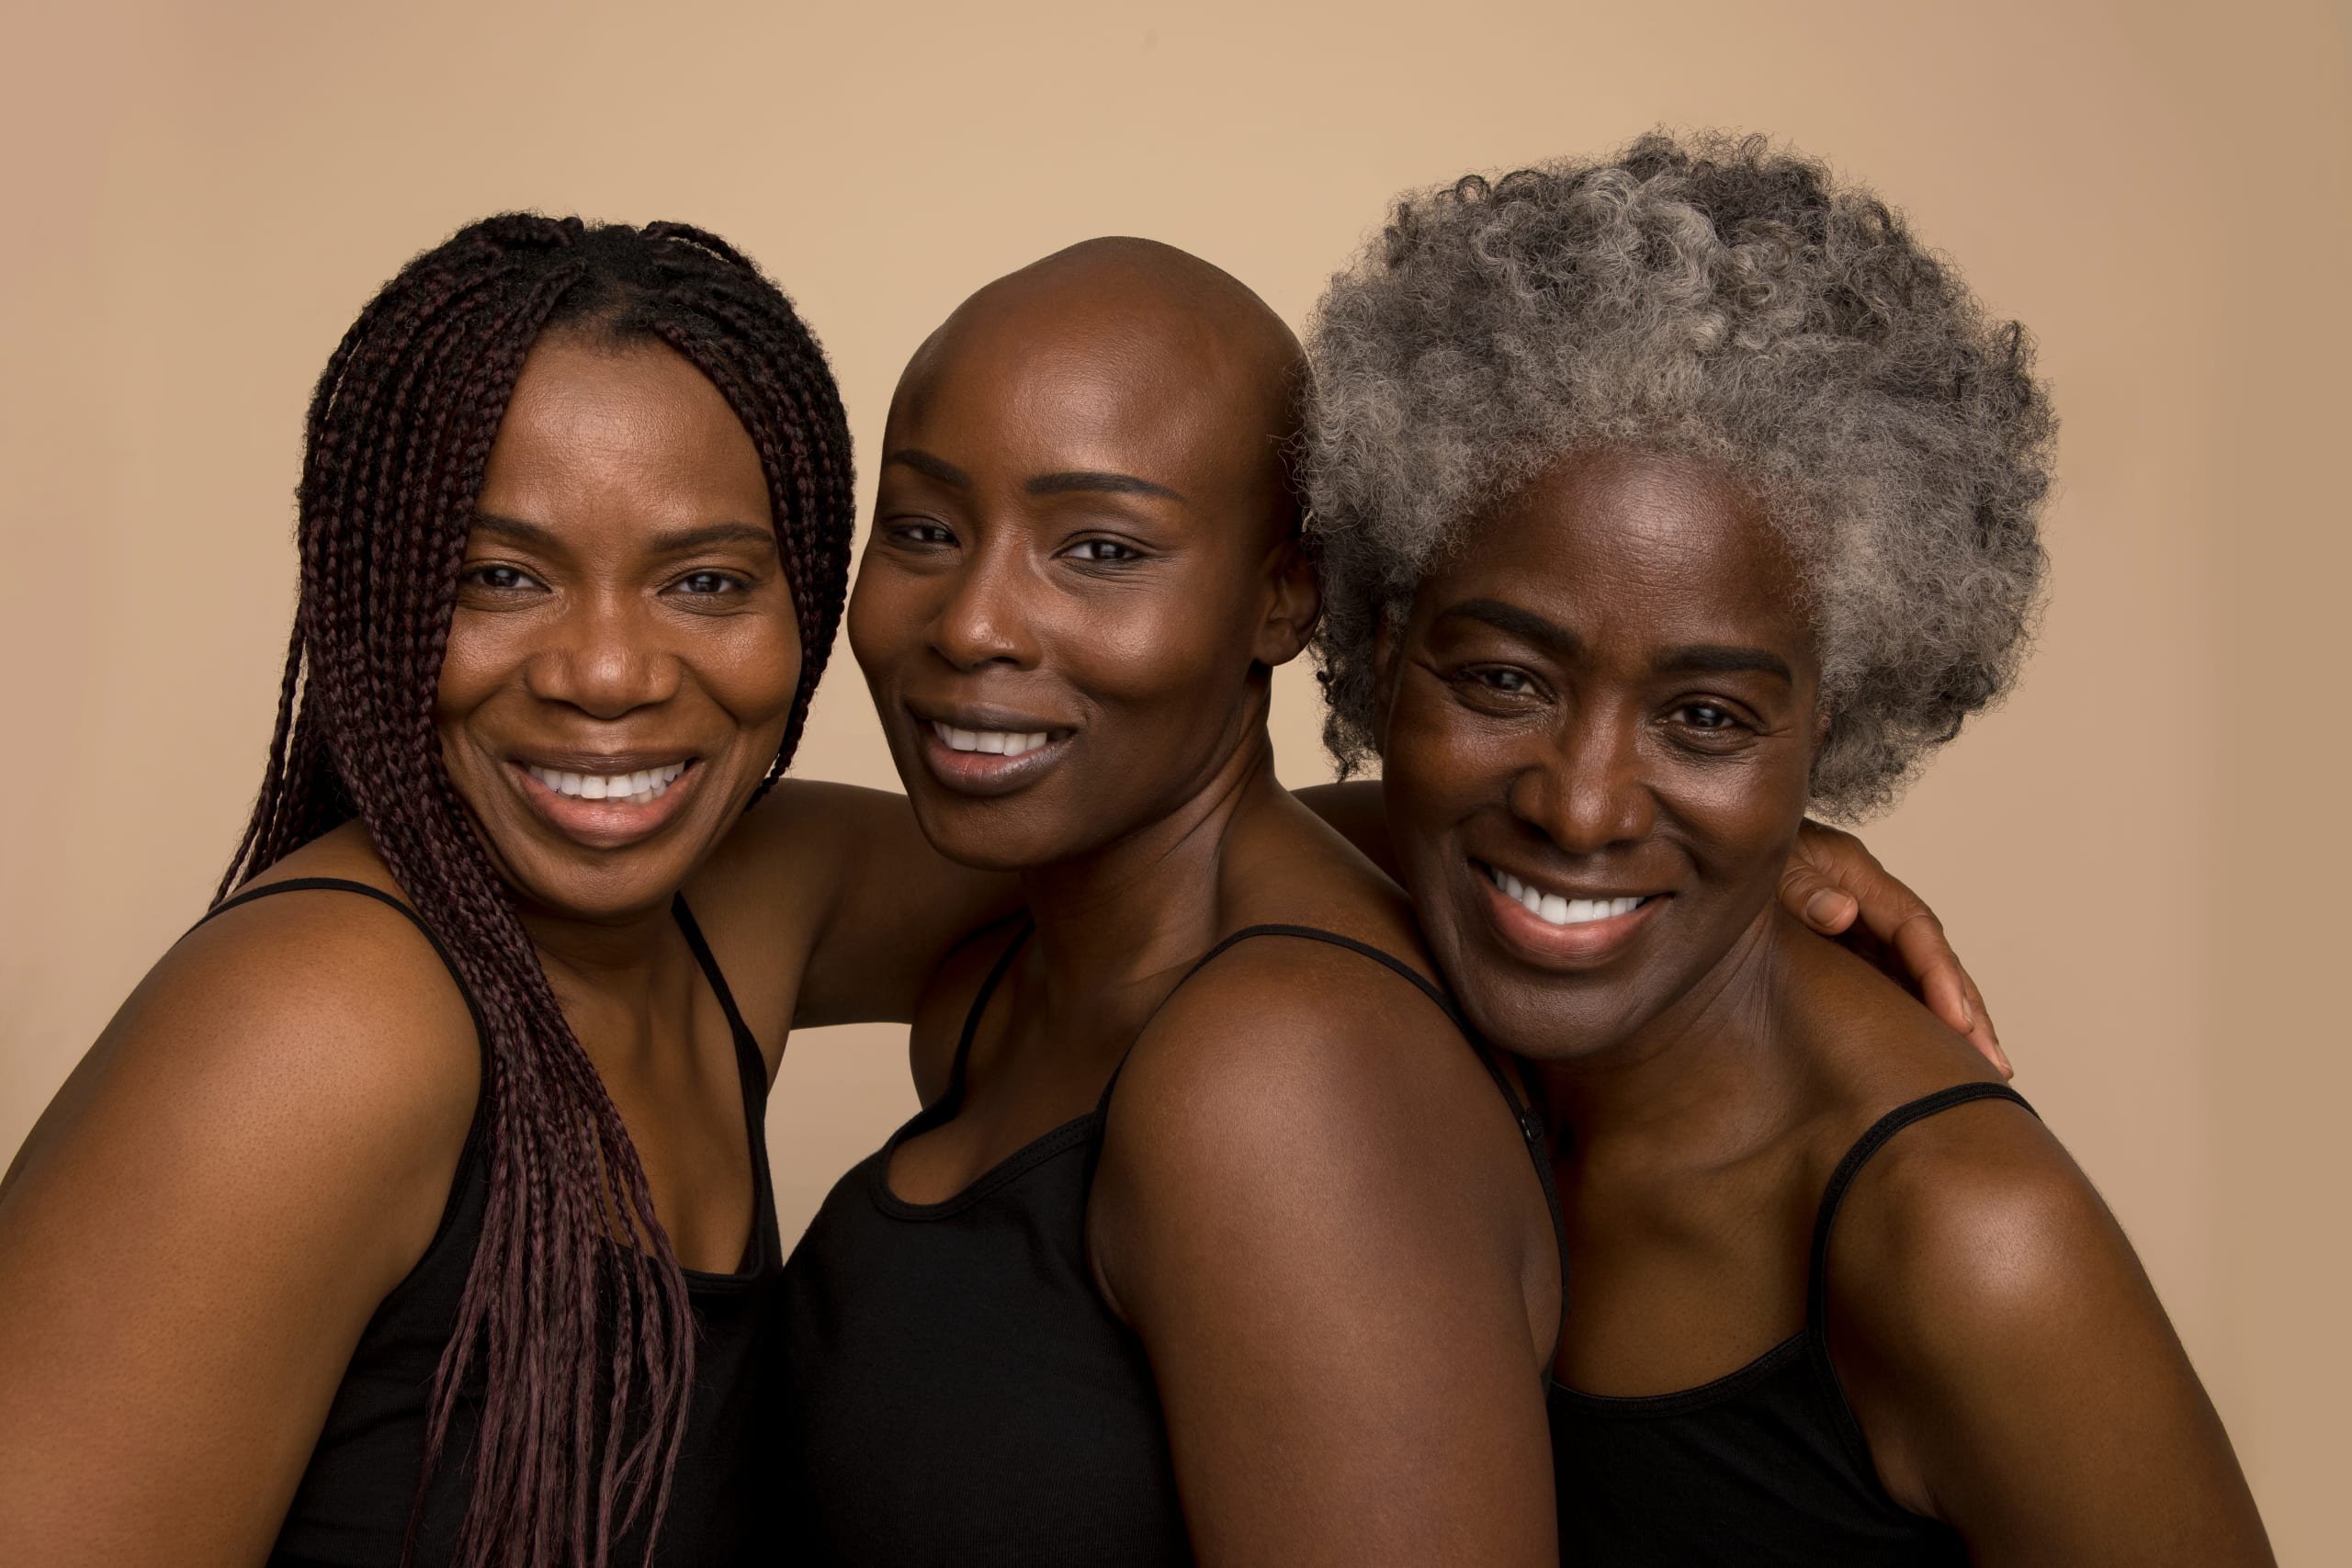 Now more than ever, we need to keep trusting Black women